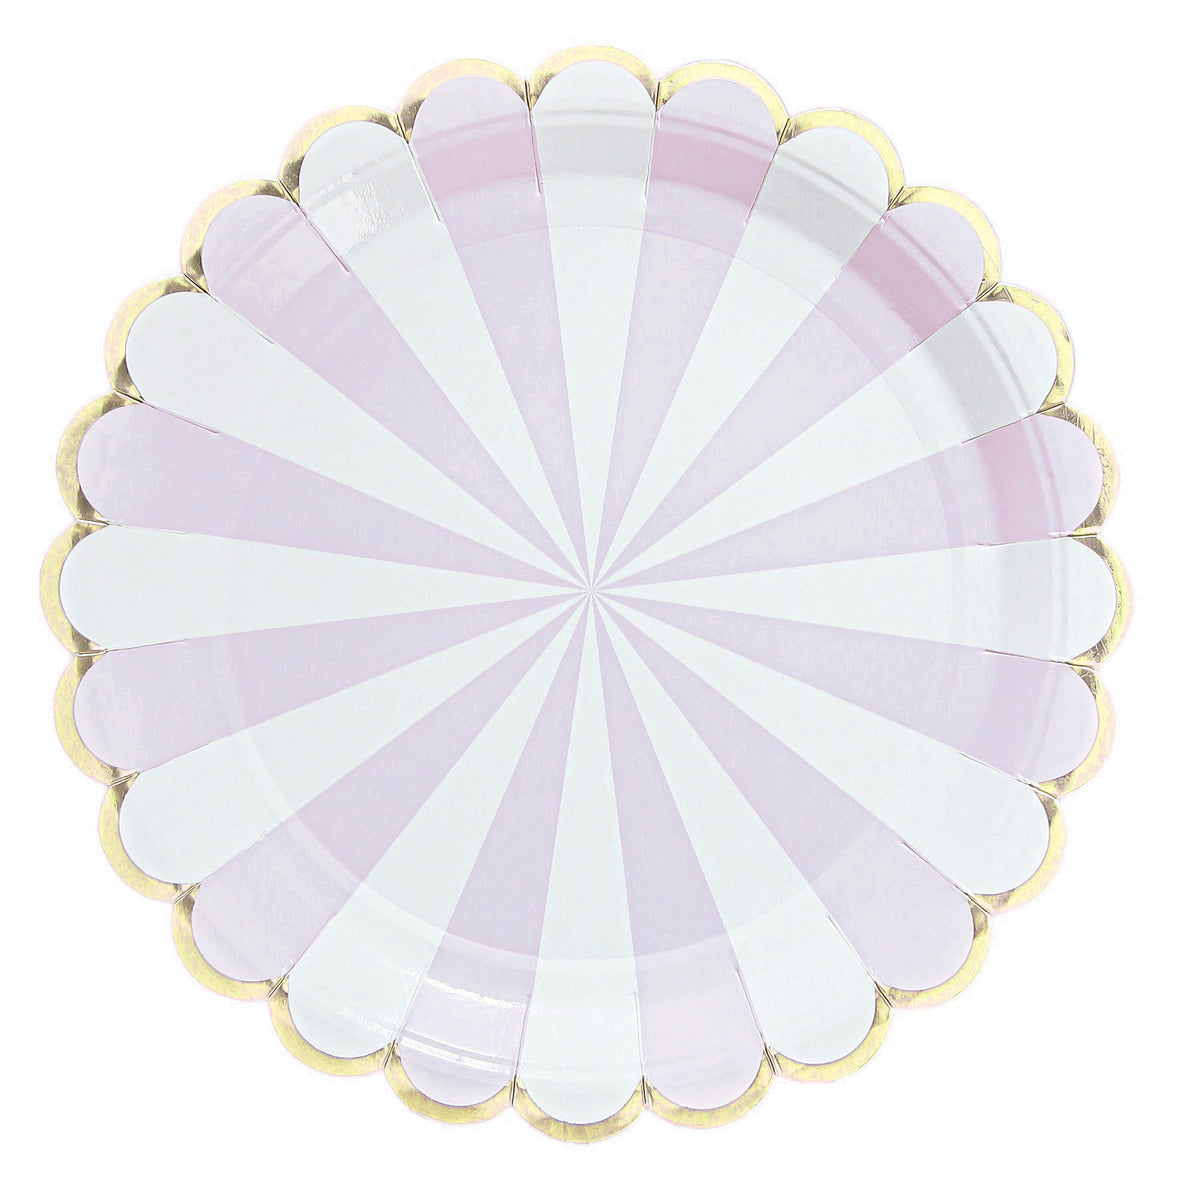 YIWU SANDY PAPER PRODUCTS CO., LTD Everyday Entertaining Candy Land Large Lunch Paper Plates, Lavender, 9 Inches, 8 Count 810120712871